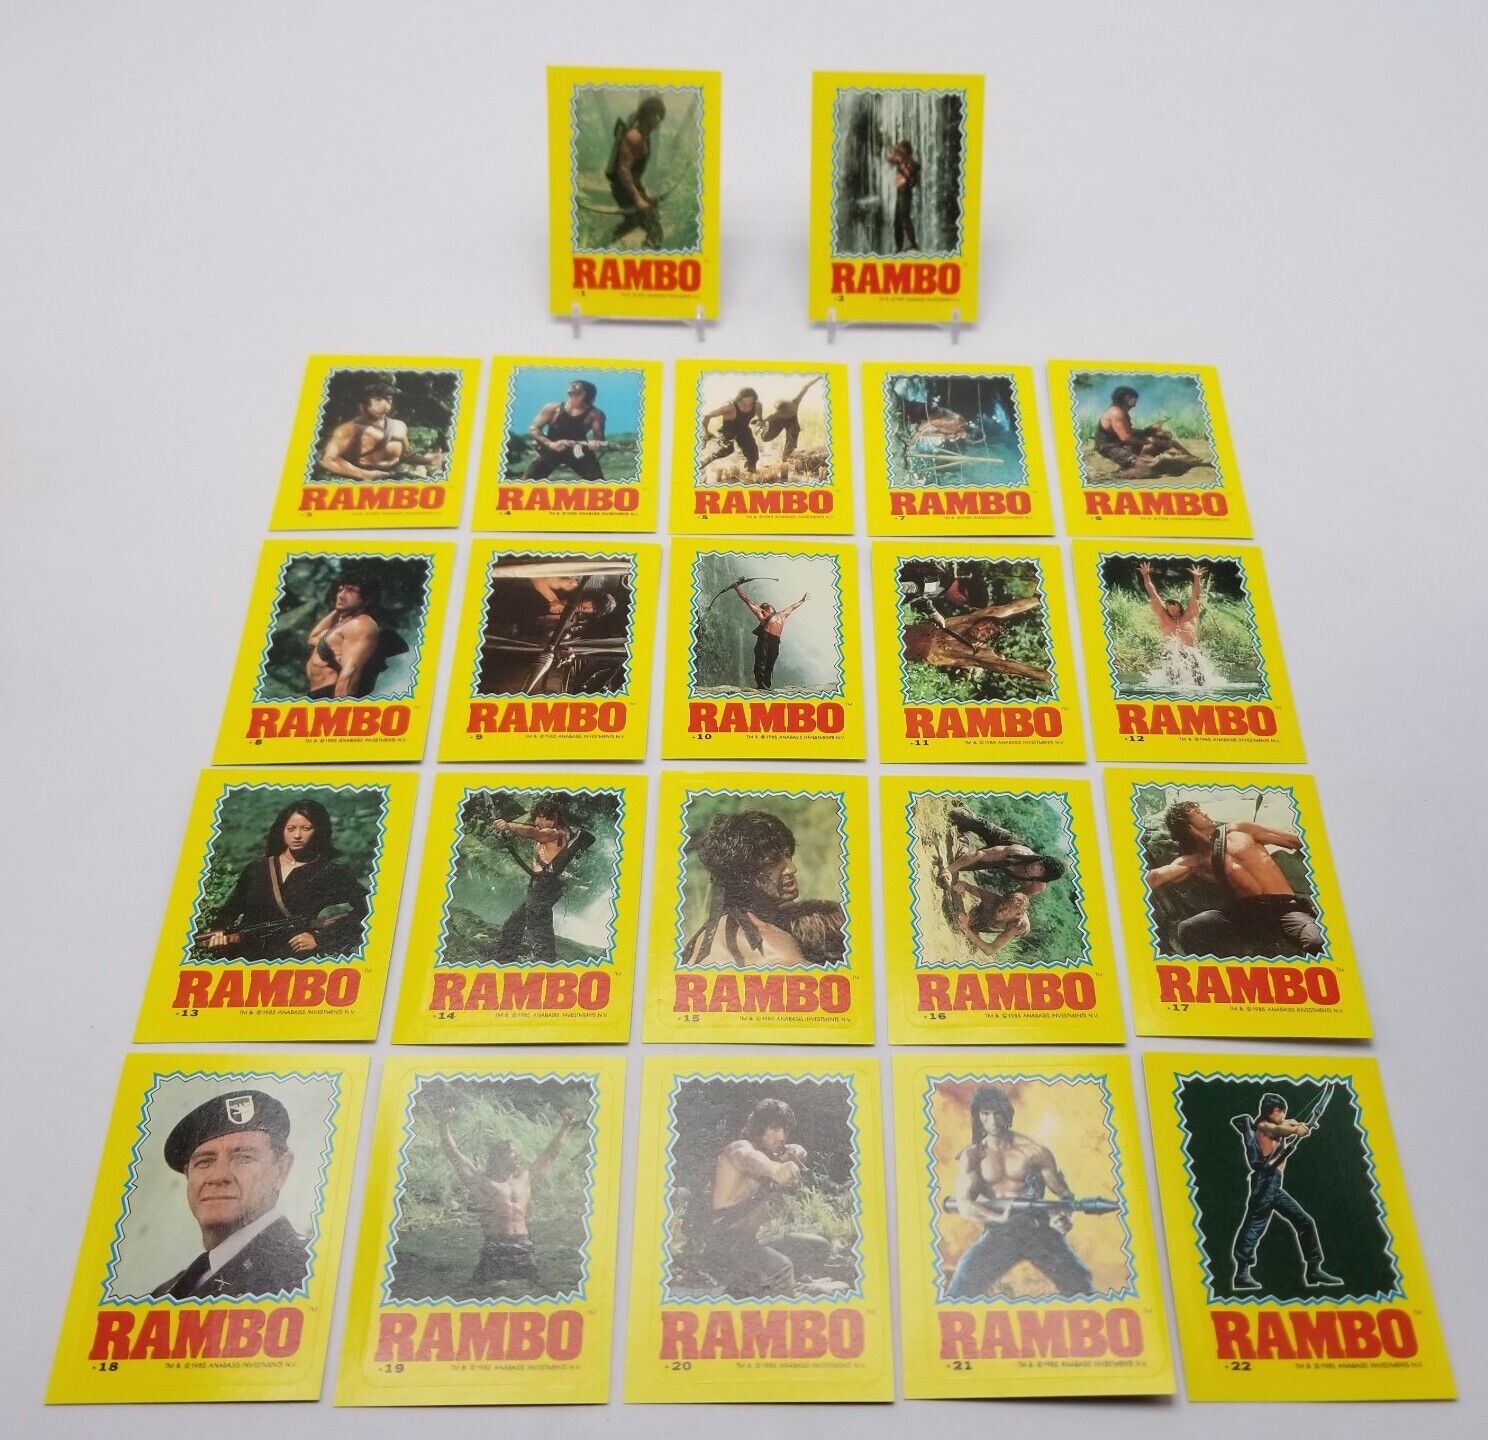 1985 Topps RAMBO (Movie) 22 Card Sticker Complete Subset / Insert Set Stallone